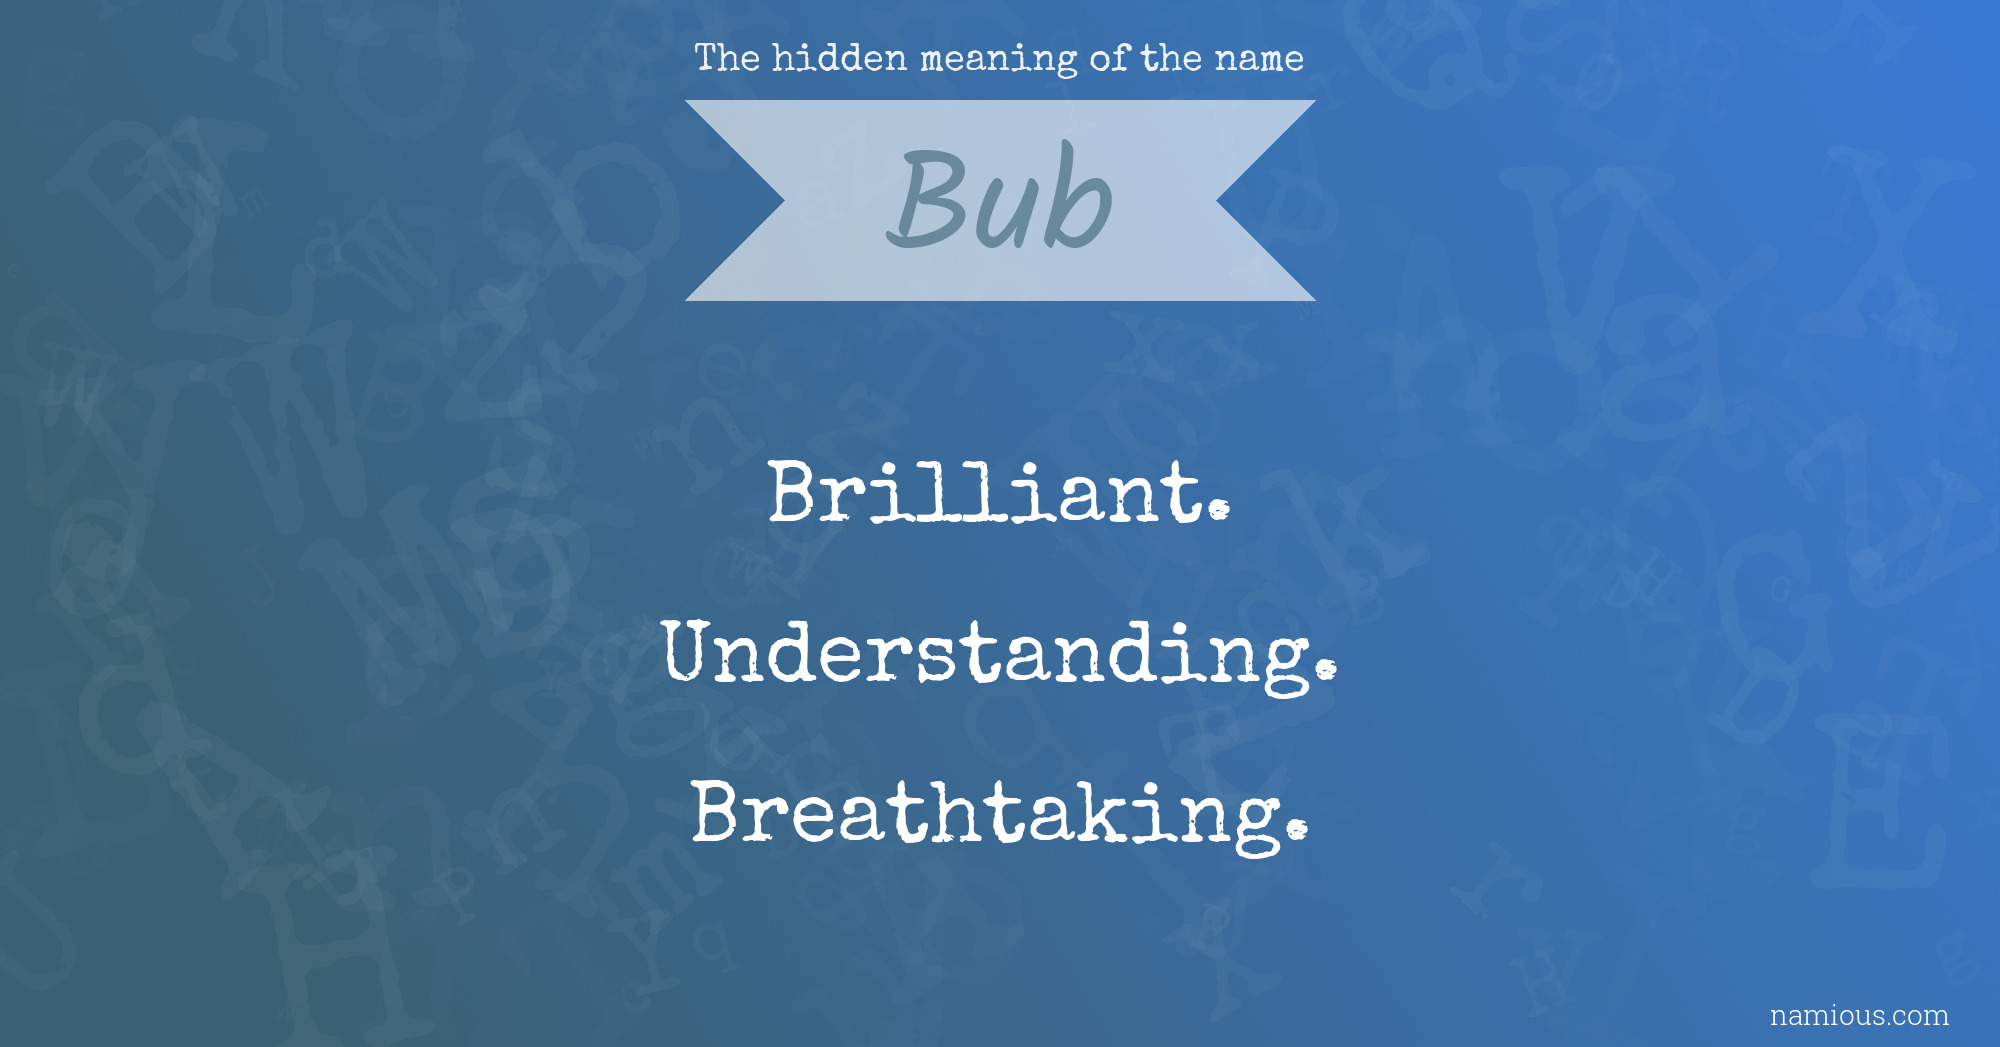 The hidden meaning of the name Bub